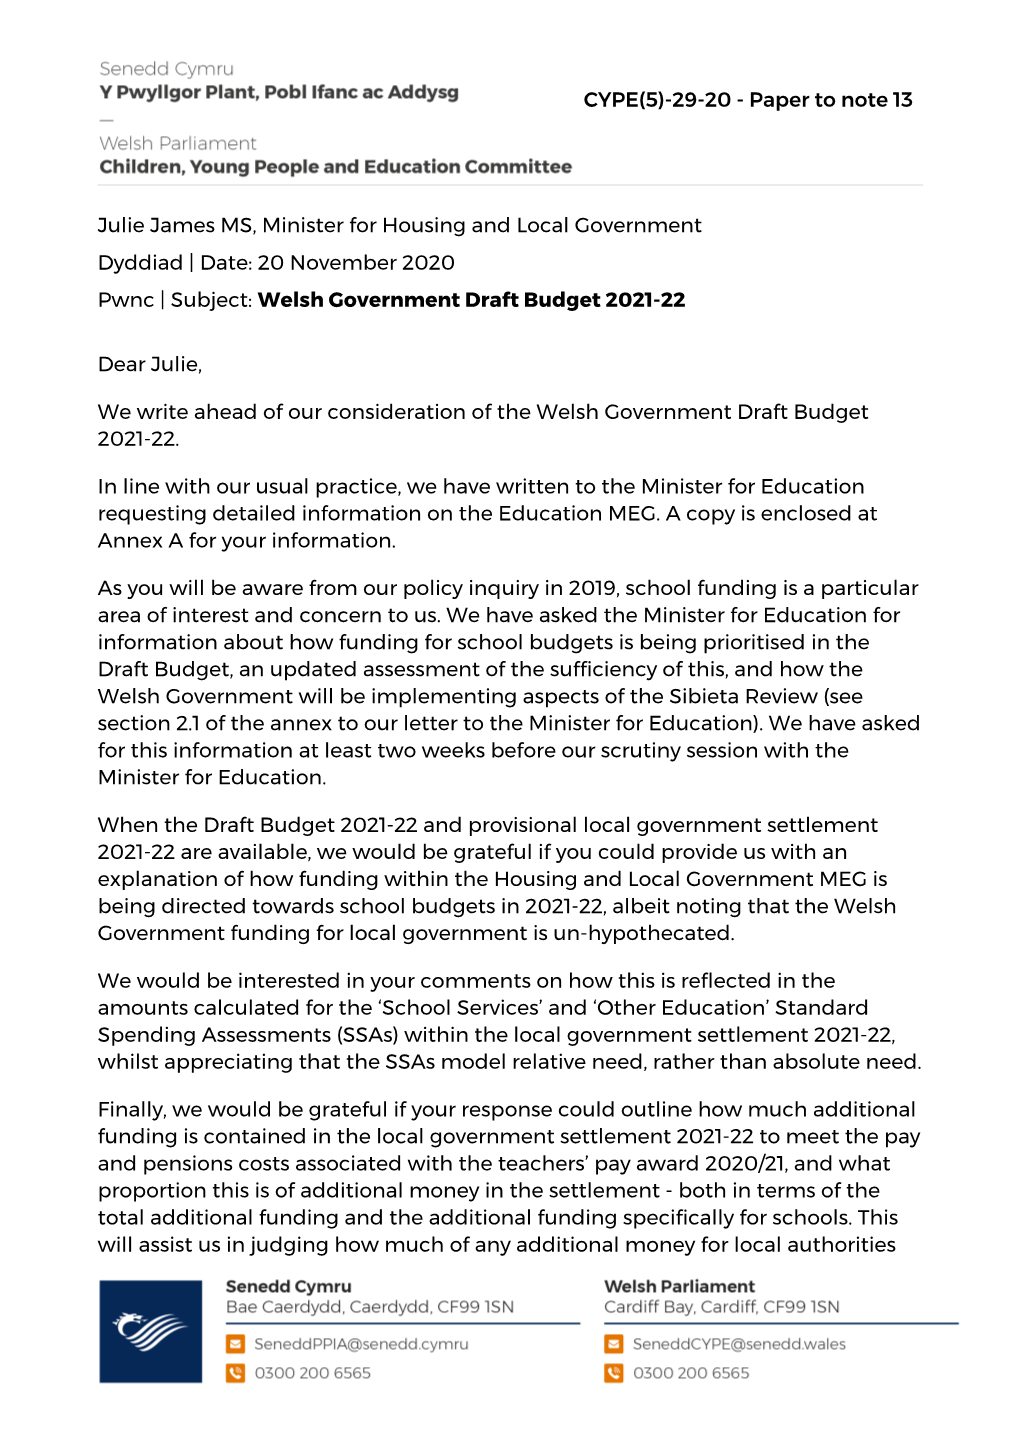 Julie James MS, Minister for Housing and Local Government Dyddiad | Date: 20 November 2020 Pwnc | Subject: Welsh Government Draft Budget 2021-22